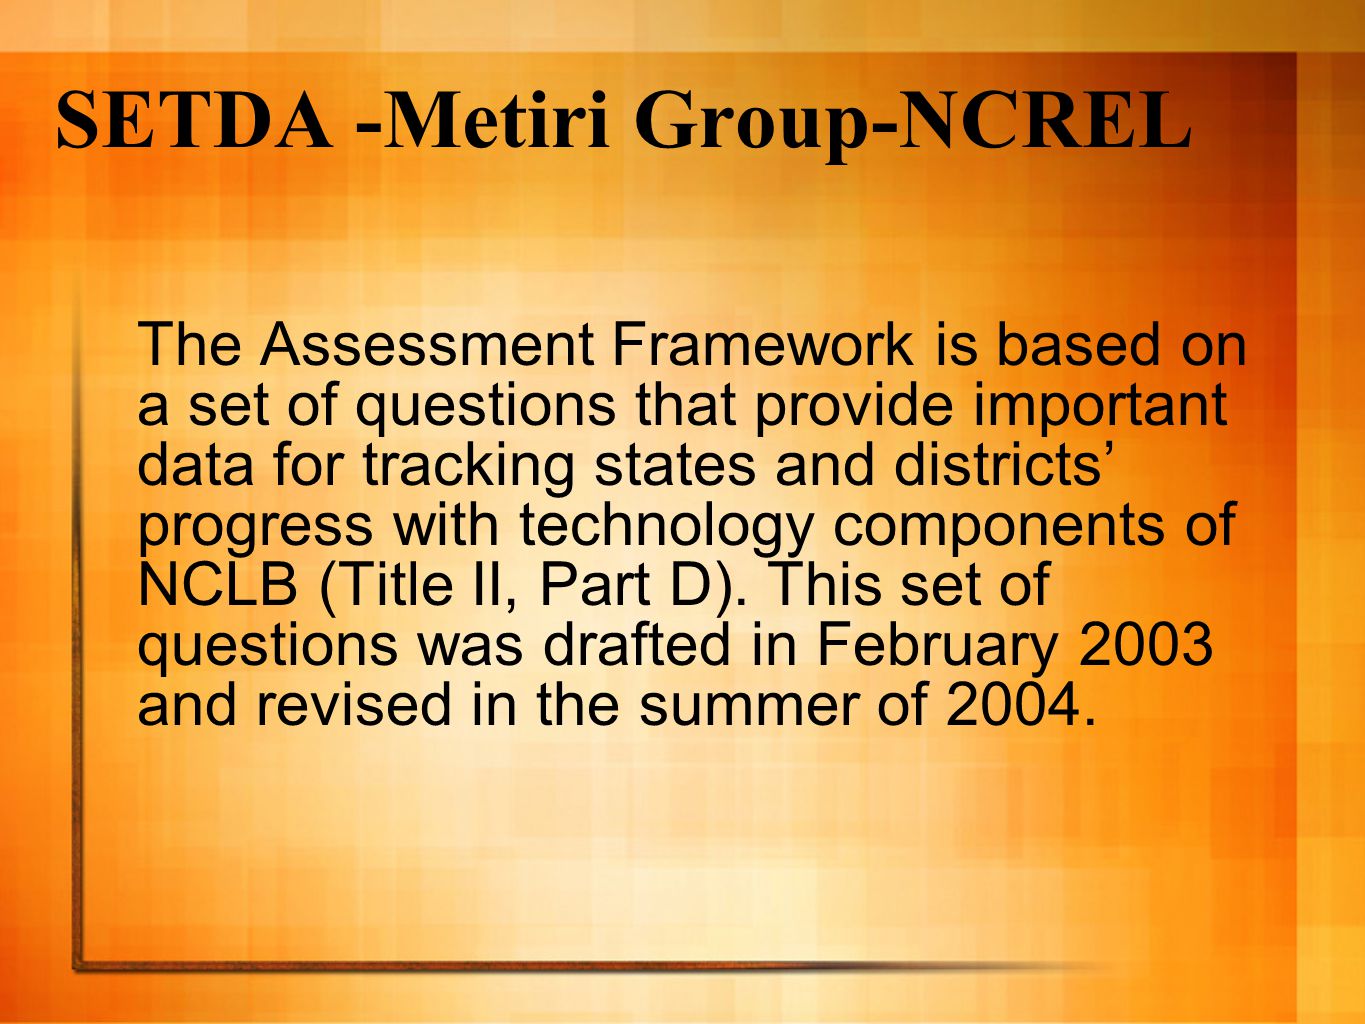 SETDA -Metiri Group-NCREL The Assessment Framework is based on a set of questions that provide important data for tracking states and districts’ progress with technology components of NCLB (Title II, Part D).